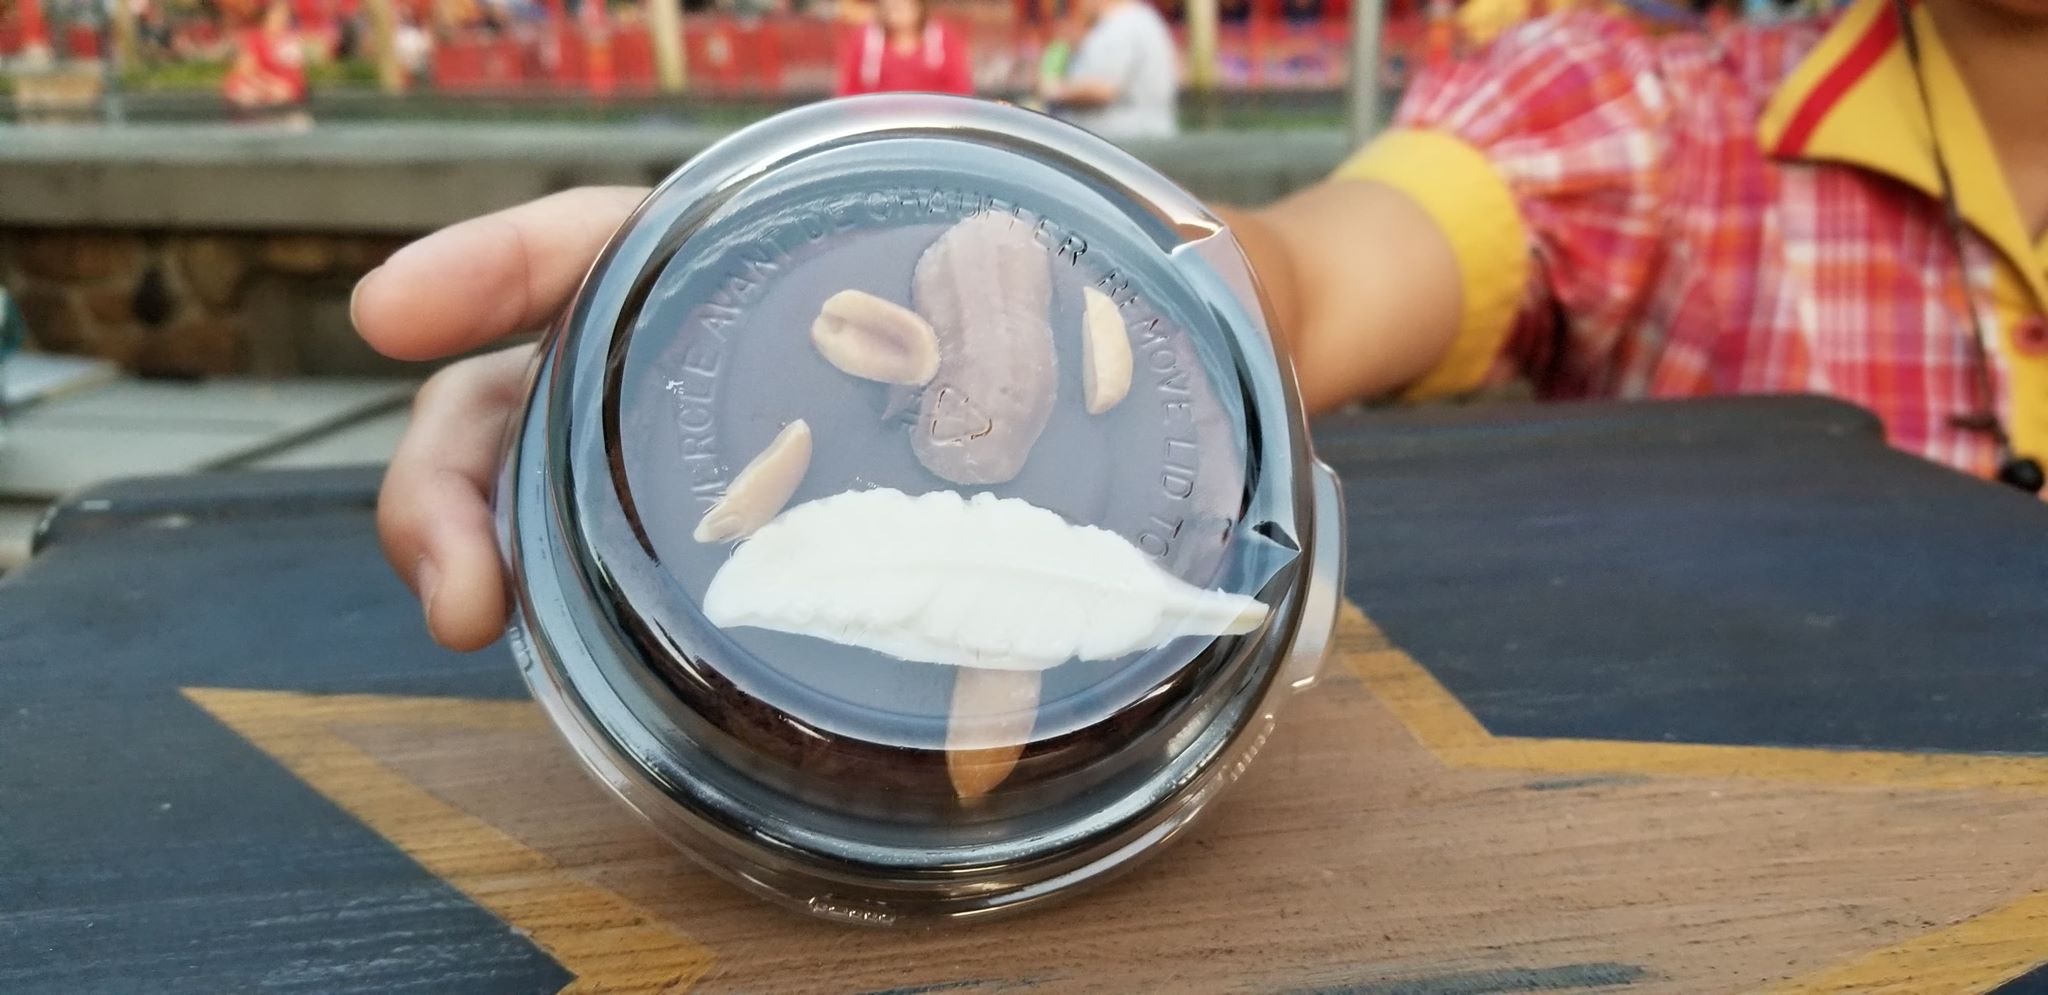 Dumbo’s Magic Feather Brownie is Now Available at Storybook Circus